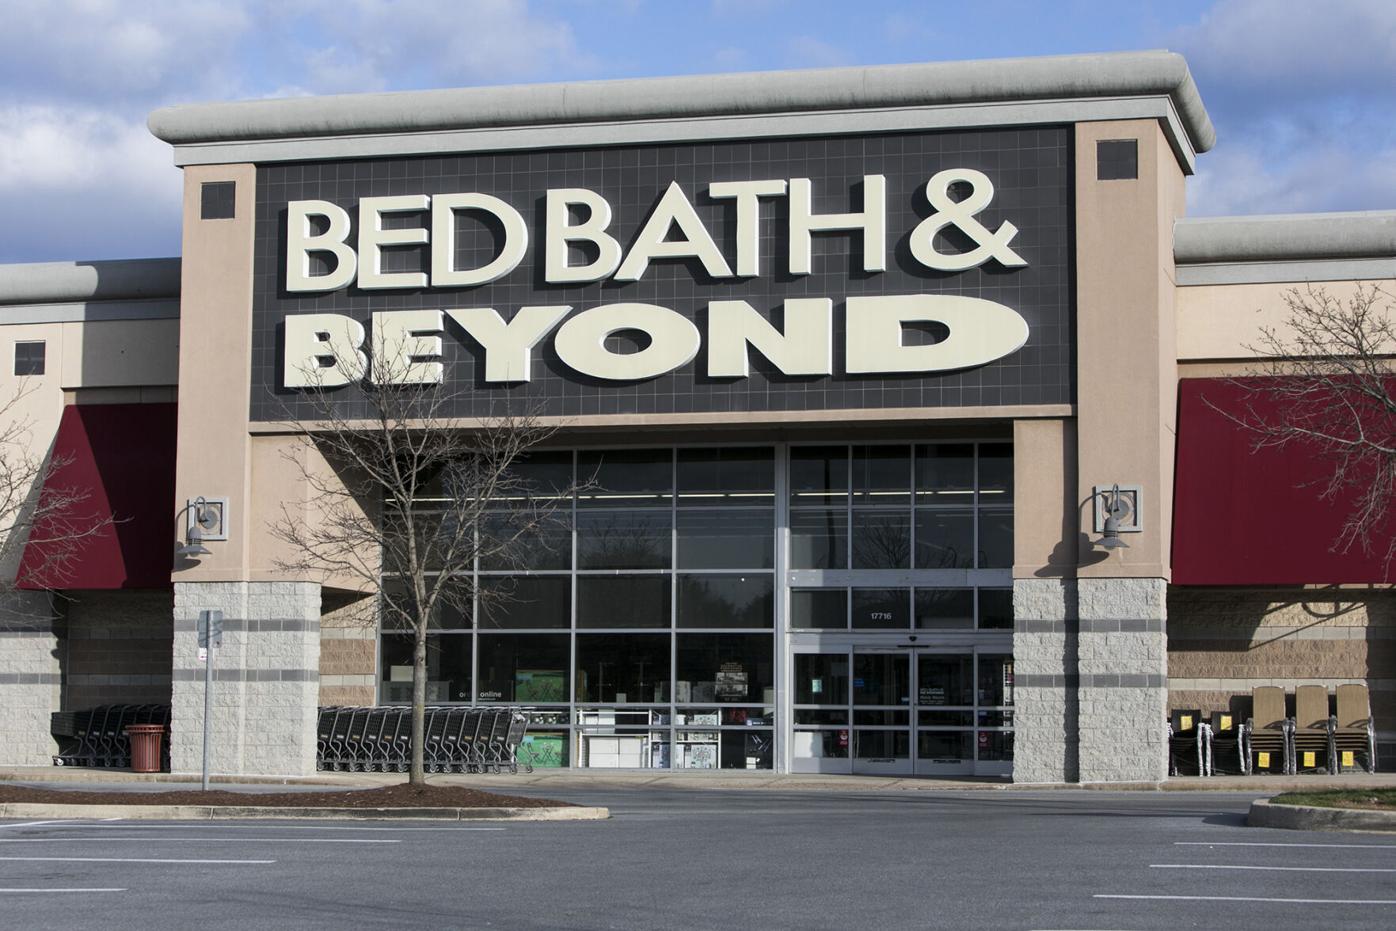 Bed, Bath & Beyond stores closed, but website relaunches through